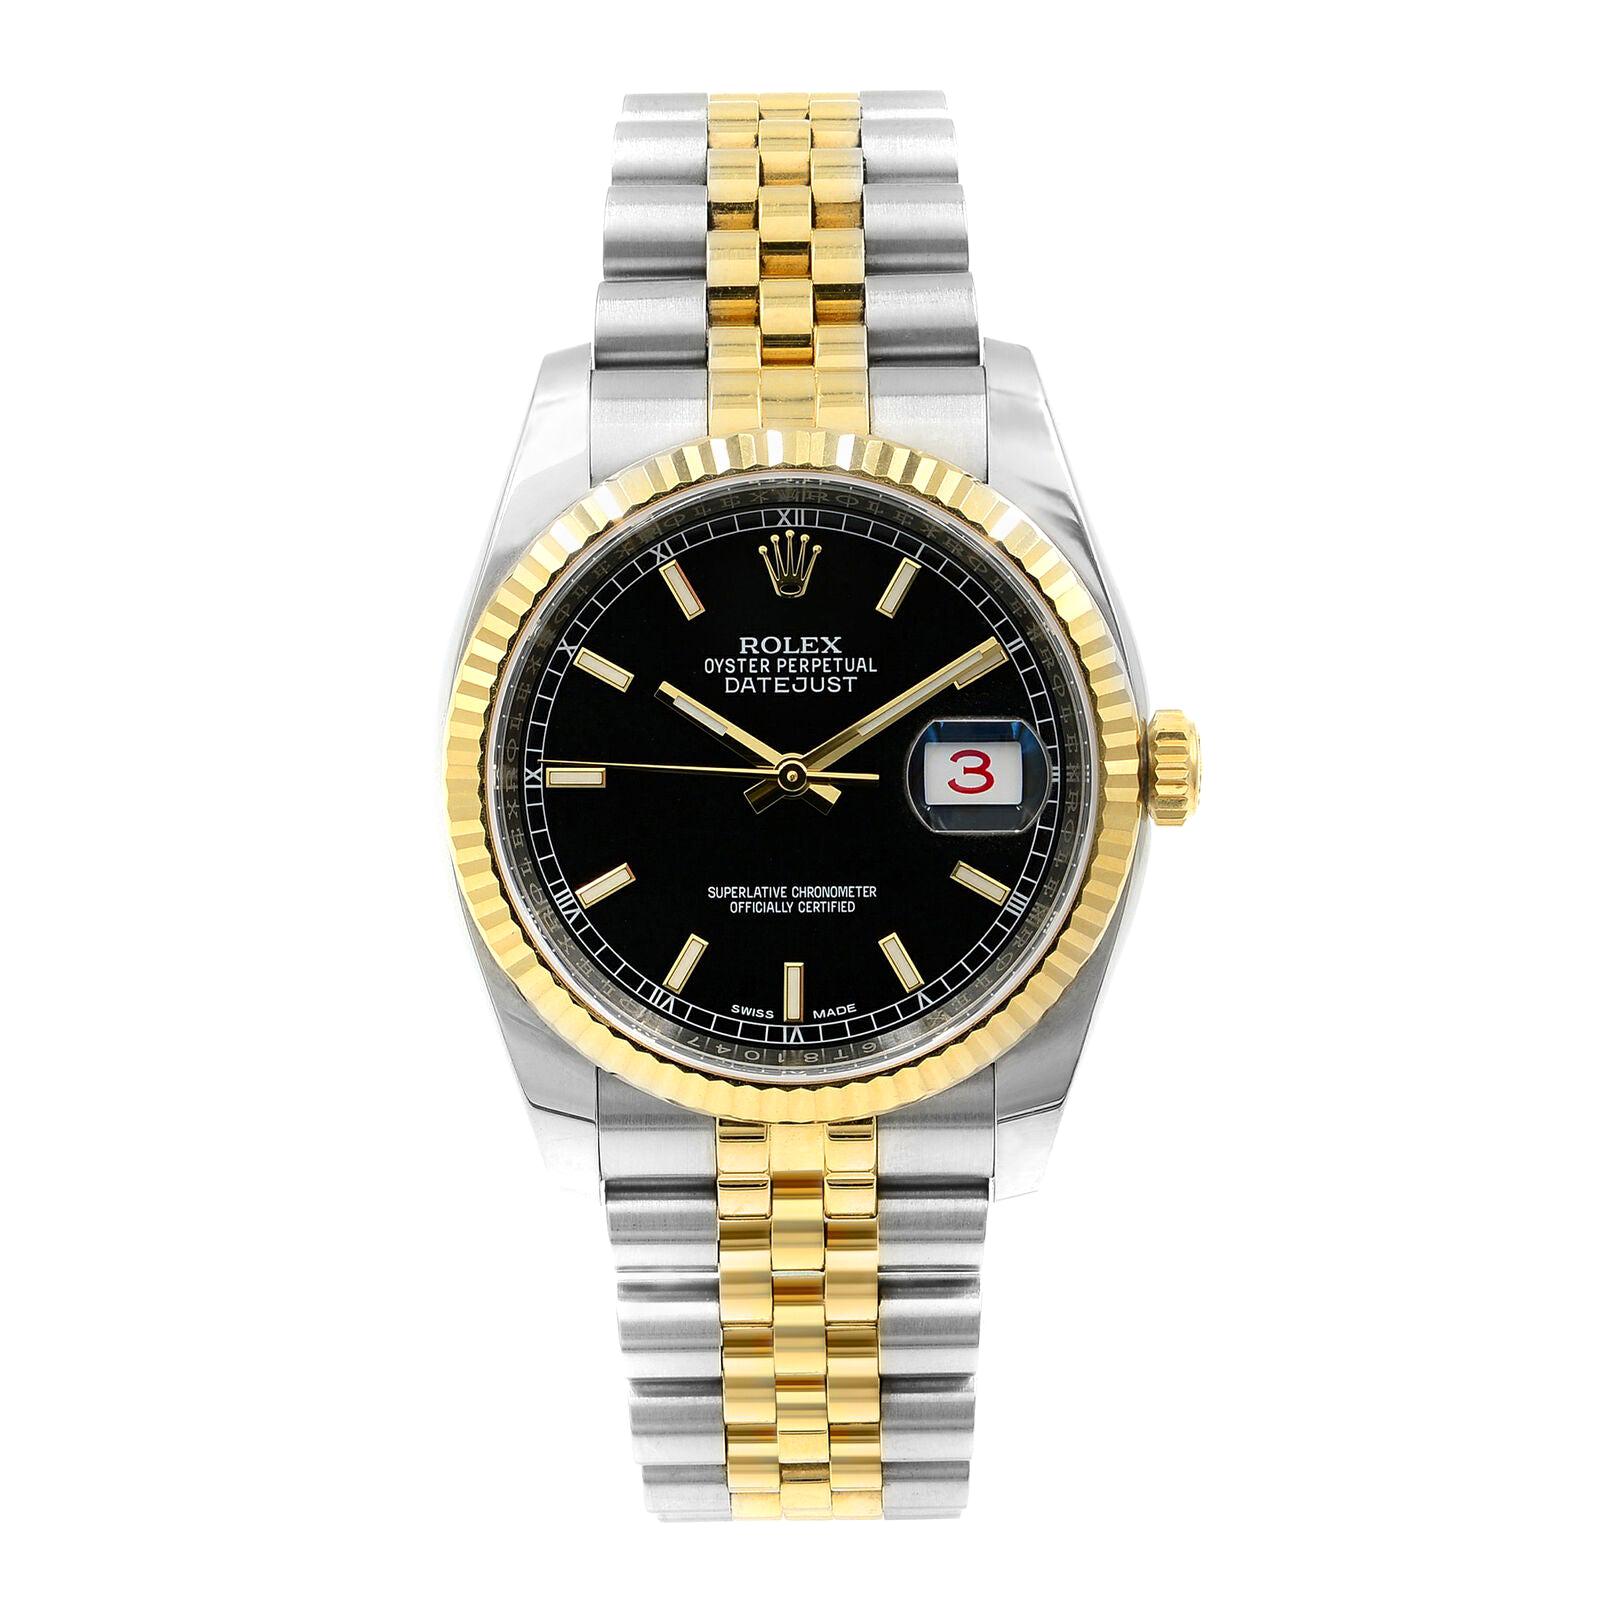 Rolex Datejust 36 Yellow Gold Roulette Date Wheel Black Index Dial Watch  116233 at 1stDibs